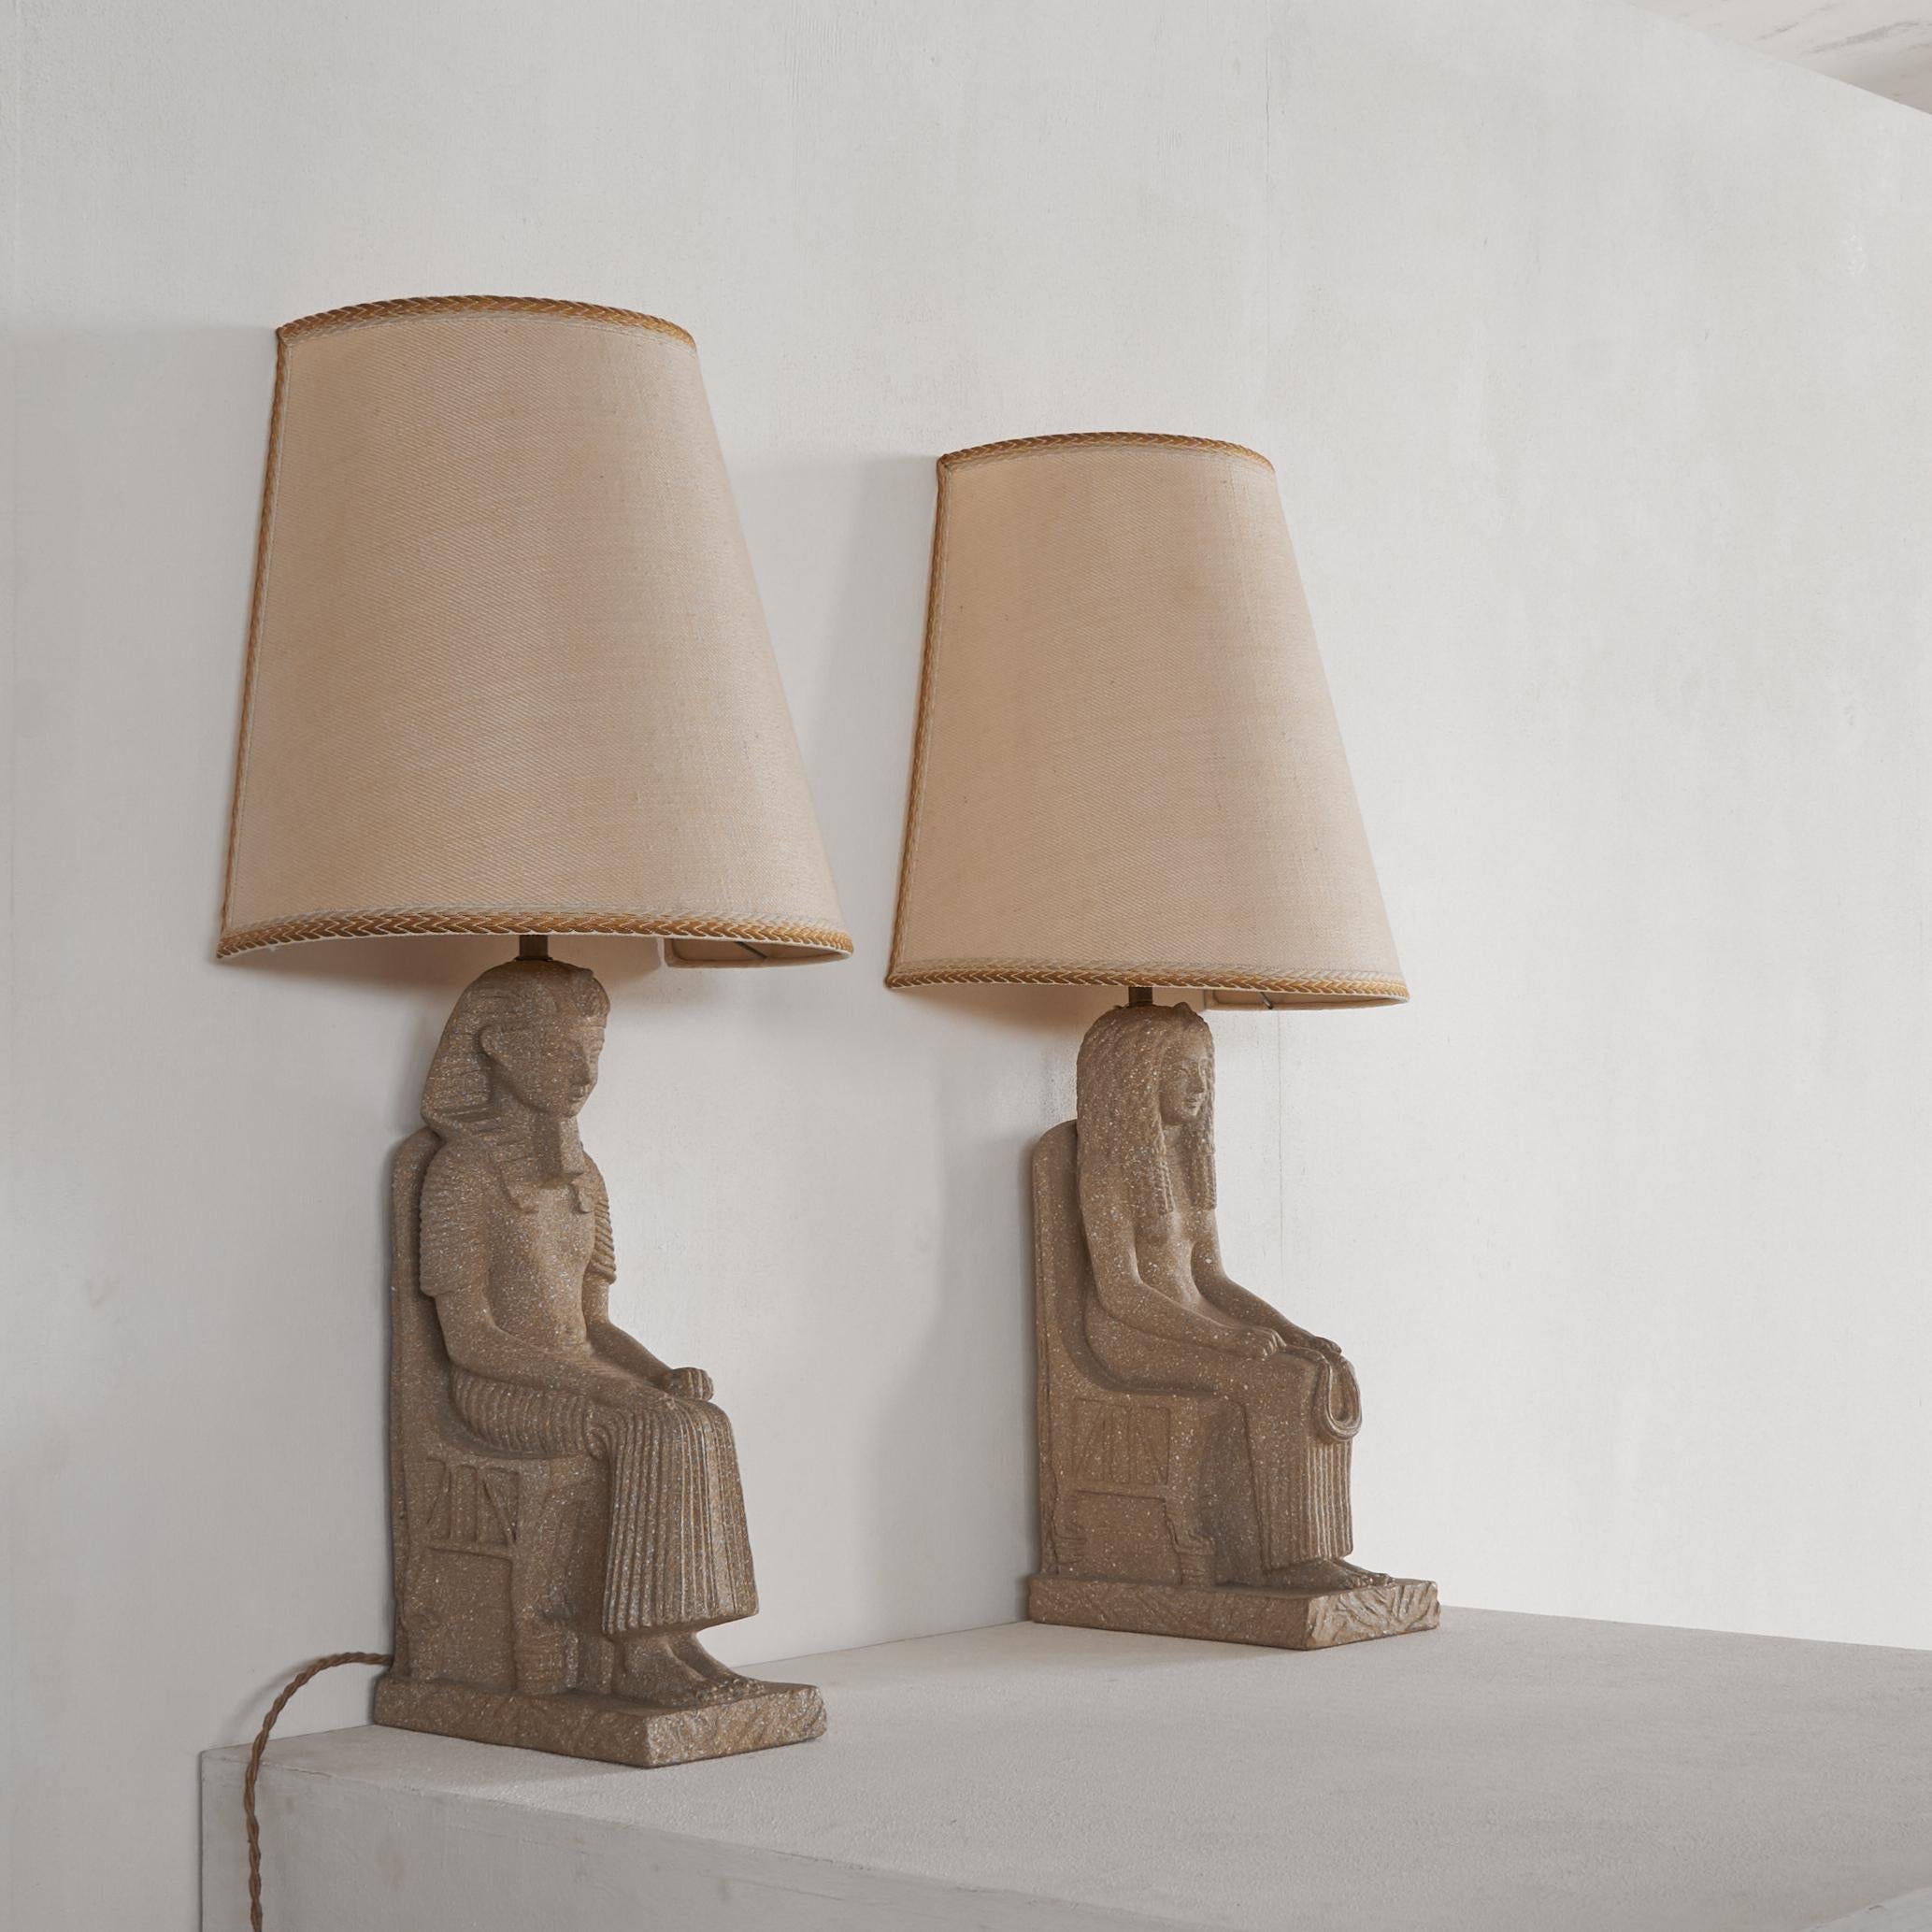 Zaccagnini Florence Pair of Monumental Pharaoh Ceramic Table Lamps Italy 1970s For Sale 1